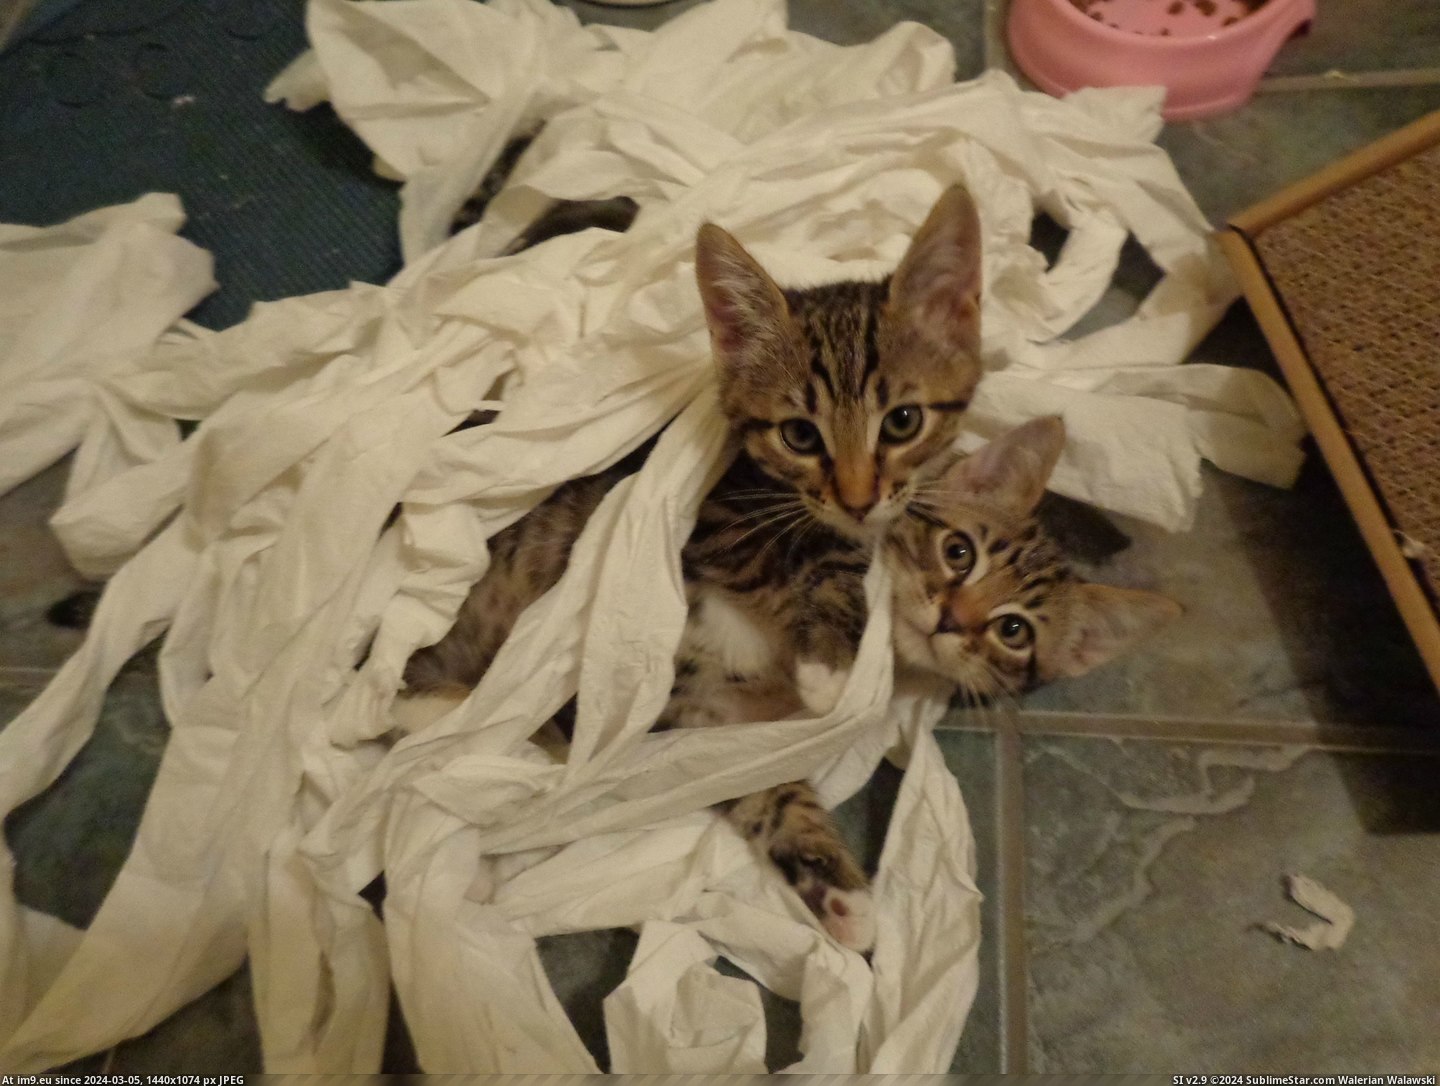 #New #Toilet #Roll #Discovered #Kittens #Paper [Aww] So my new kittens discovered the toilet paper roll... Pic. (Image of album My r/AWW favs))